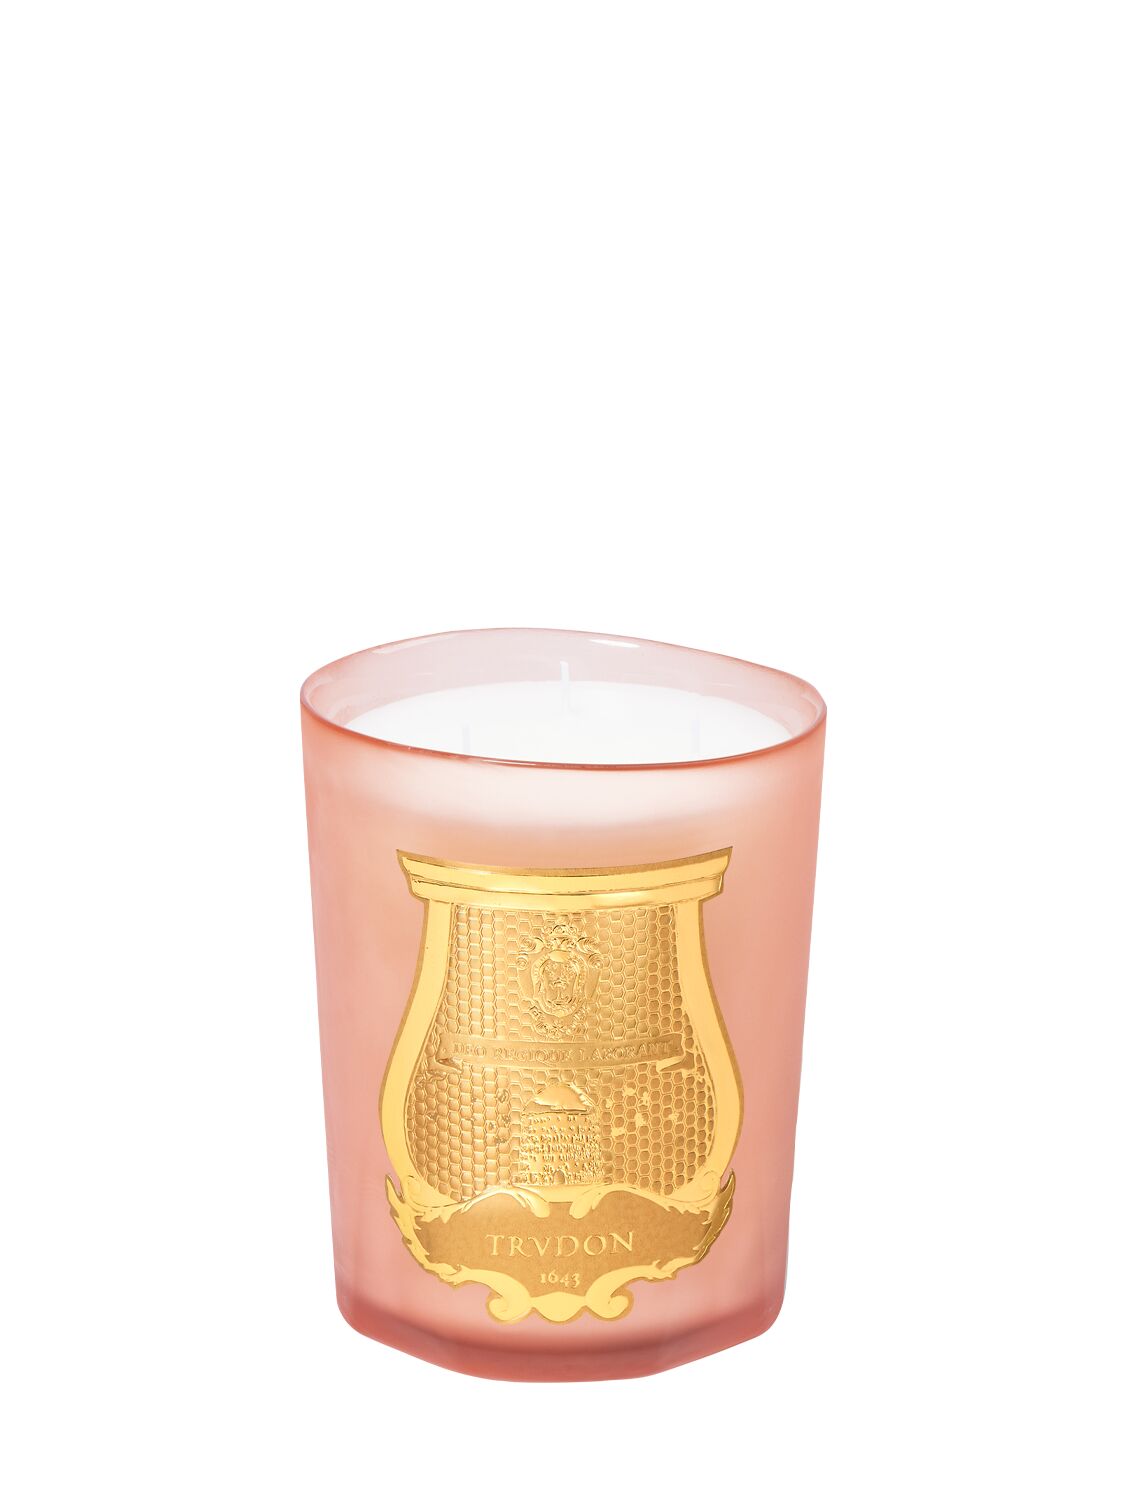 Trudon 270gr Tuileries Classic Bougie In Pink